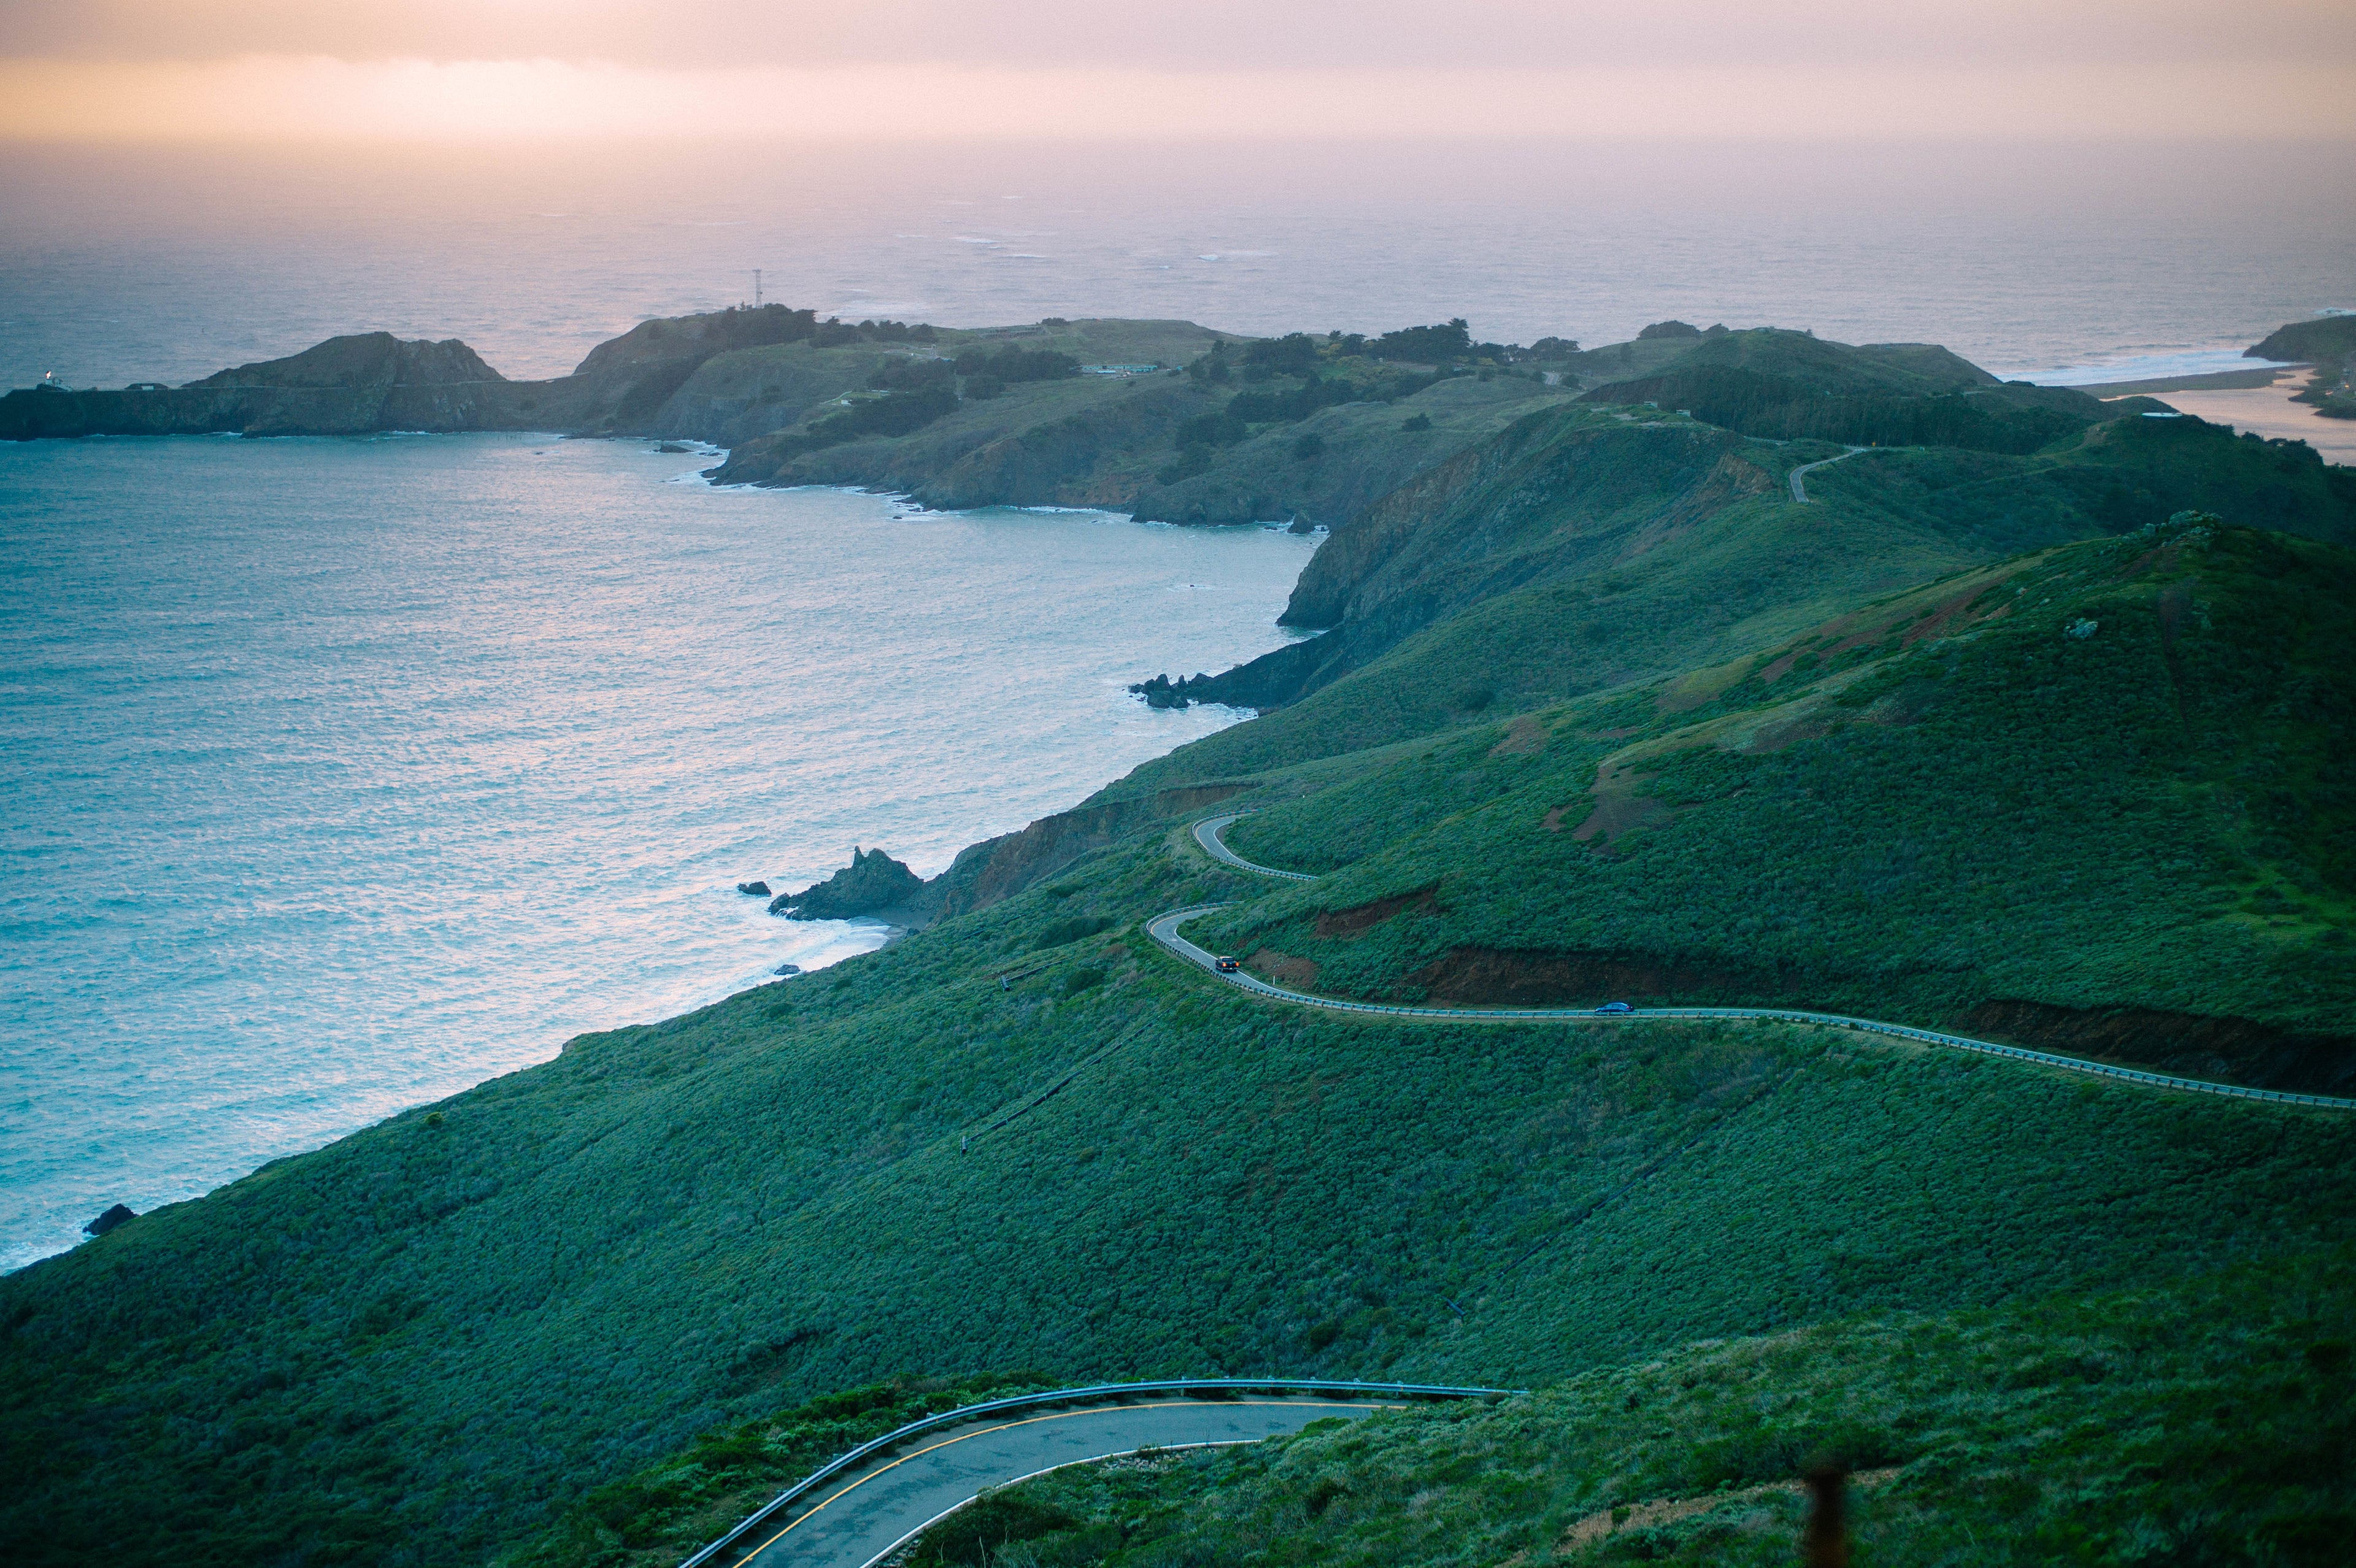 an aerial photo of a highway winding througn the hills, next to the coast, with a sunset in the background. there is a car travelling away from the camera in the distance